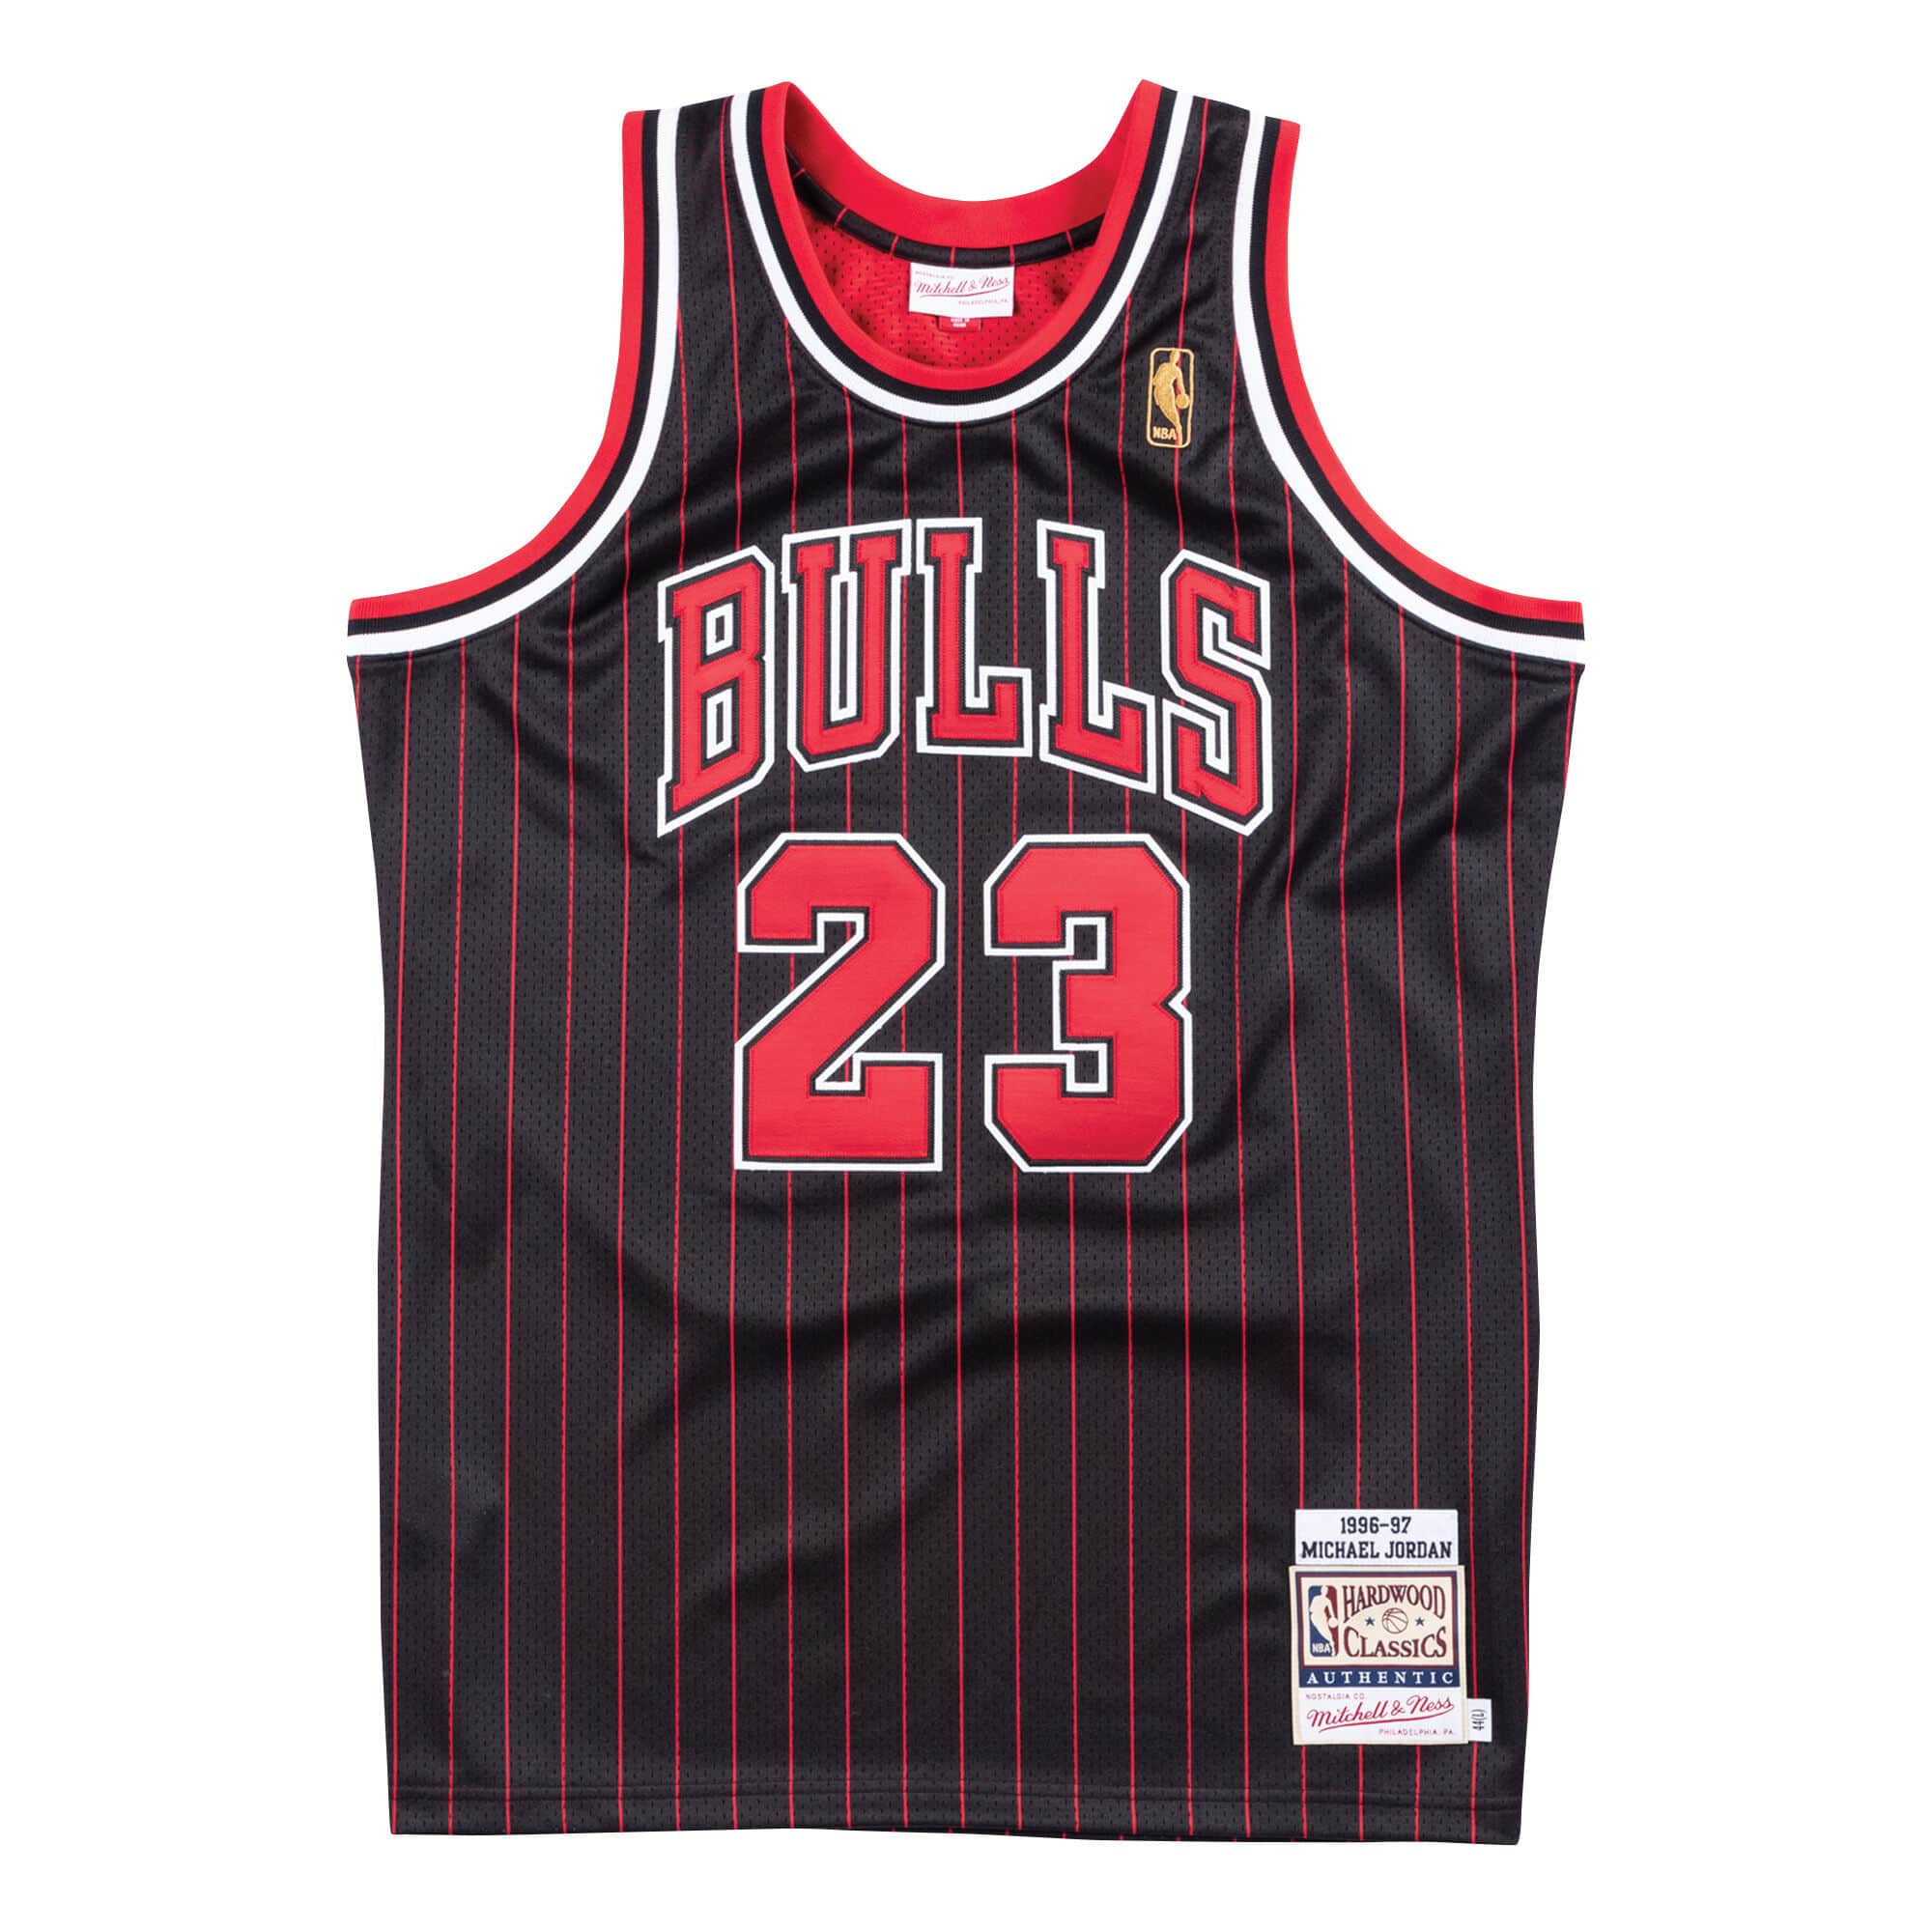 Men's Mitchell & Ness Black Chicago Bulls City Collection Heritage Mesh Shorts